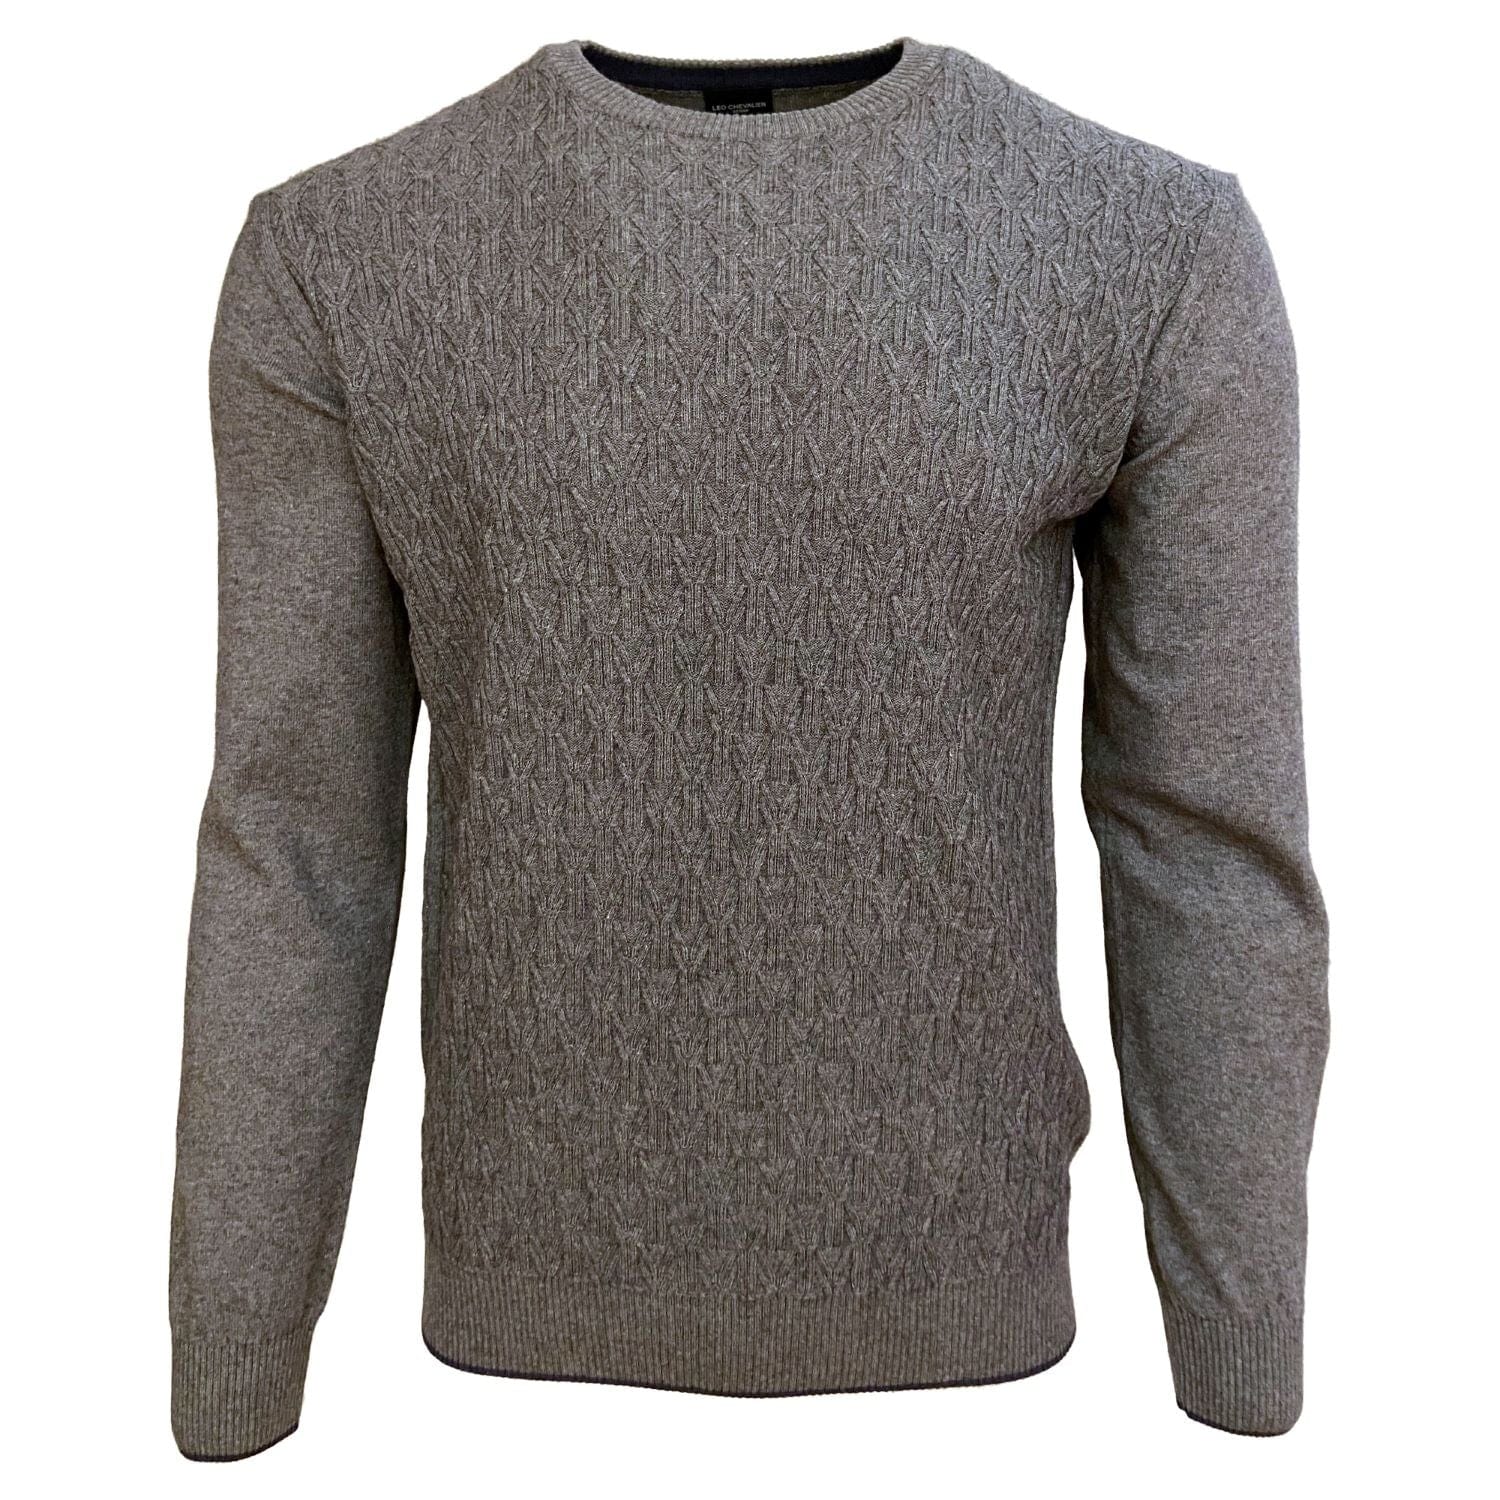 Leo Chevalier Design Luxurious Italian-Made Cable Knit Crewneck Available in Steel Blue & Charcoal